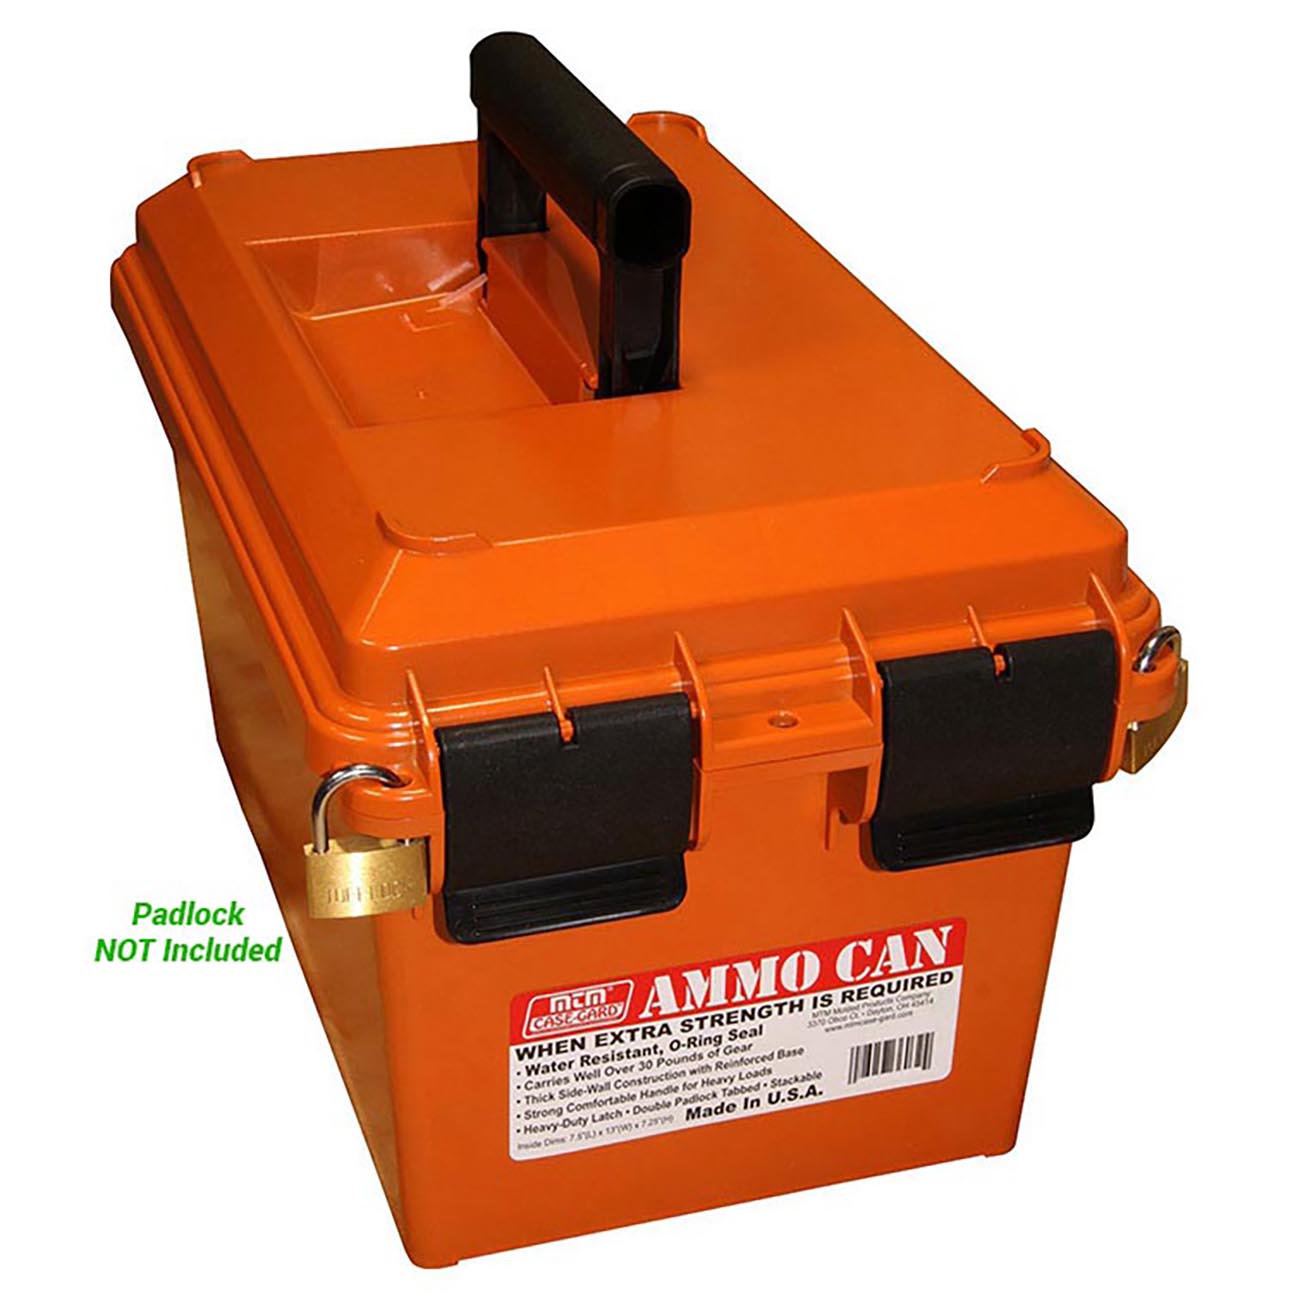 Made in USA Molded Polypropylene Stackable Ammo Can by